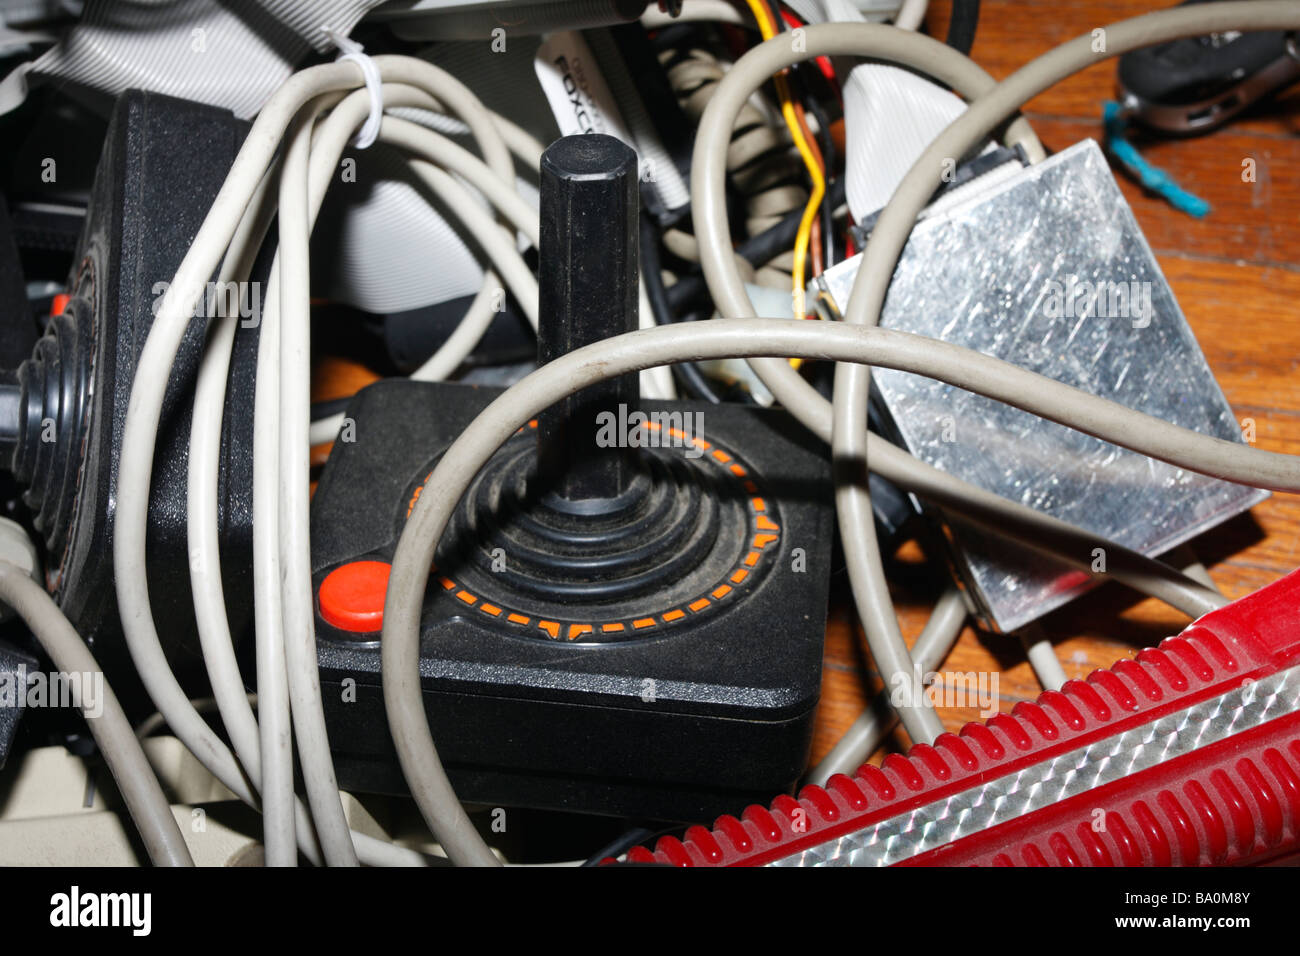 Old Atari simple joystick with one button amid pile of wires and other electronics junk. Stock Photo